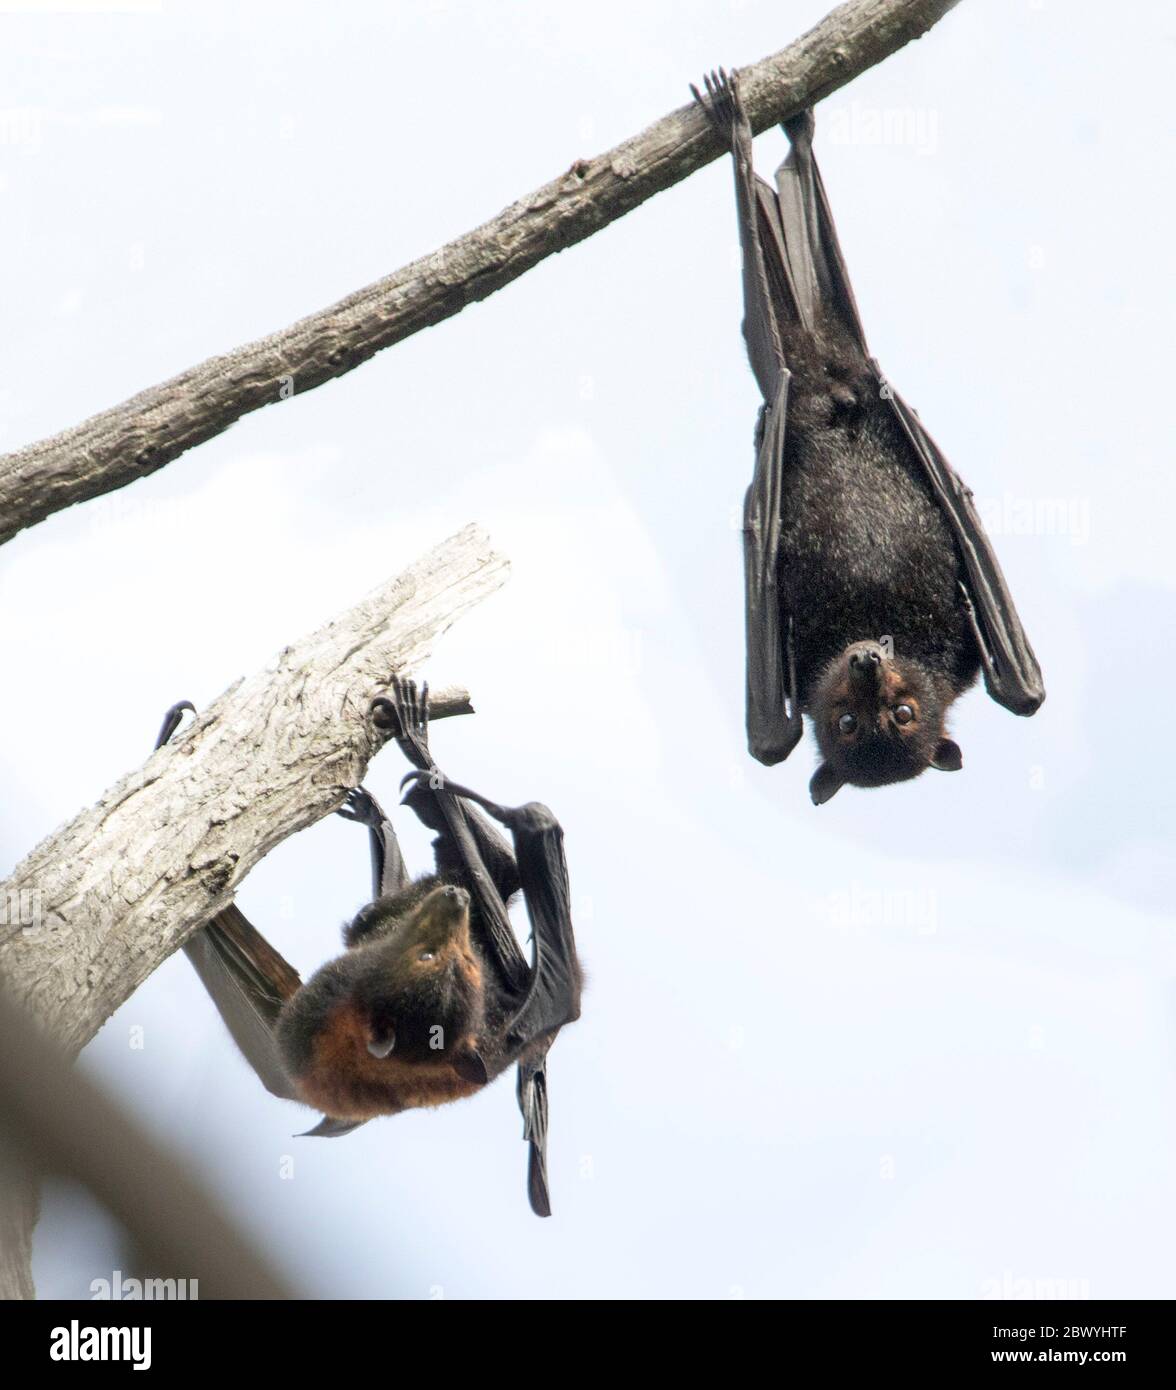 Australian grey-headed flying foxes / fruit bats, Pteropus poliocephalus, hanging from branch of tree and against background of light sky Stock Photo